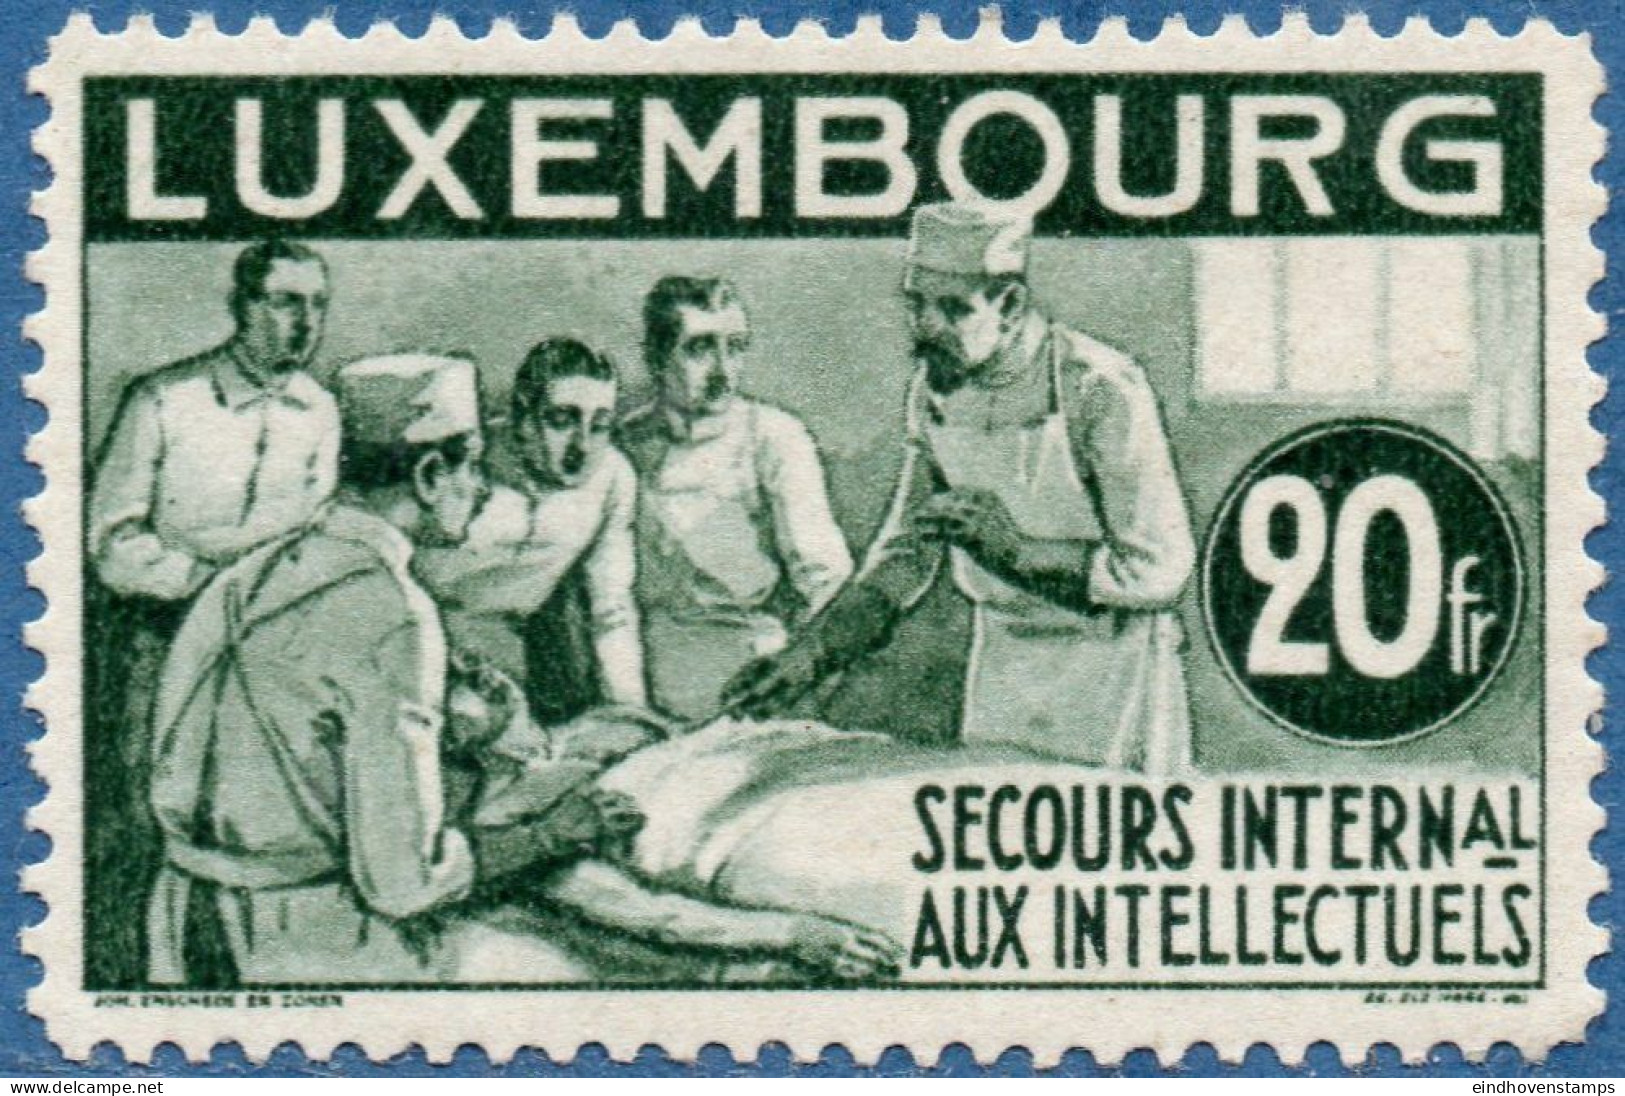 Luxemburg 1935 20 Fr, Surgeon At Operating Room With Patient, International Aid Emigrated Scientists 1 Value MNH - Medicine